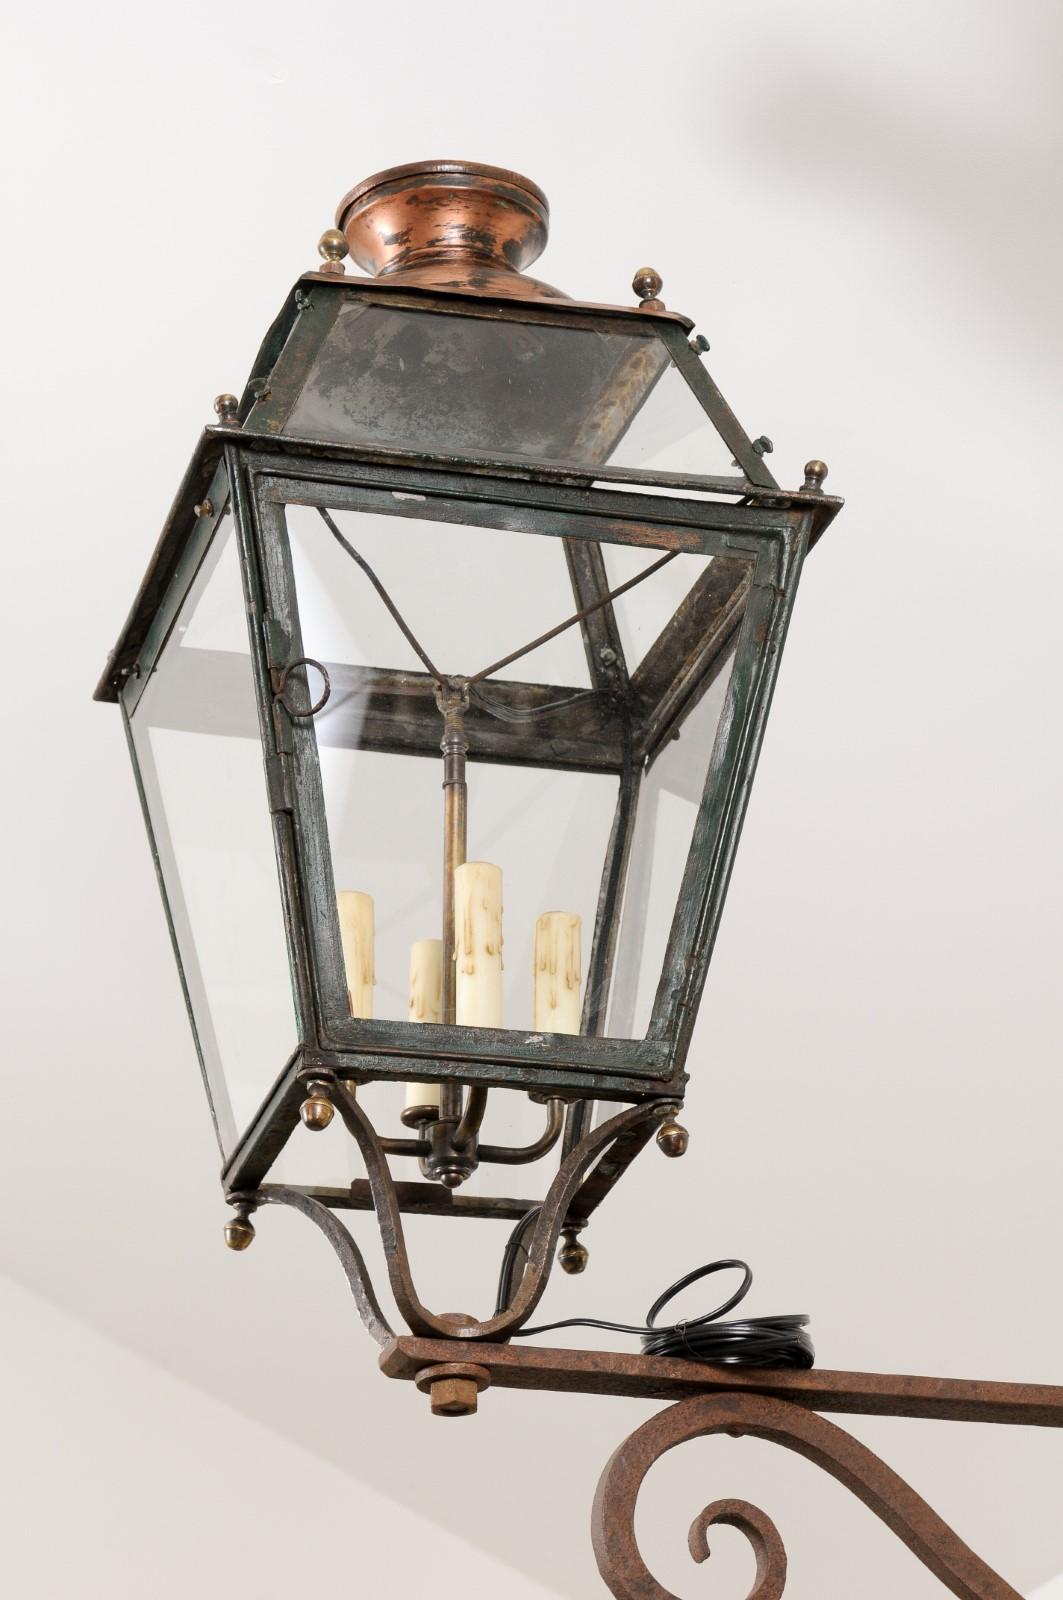 A French iron wall lantern from the late 19th century, with four lights, glass panels, and scrolling bracket. Created in France during the last decade of the 19th century at a time when the Impressionist roamed the countryside in search of